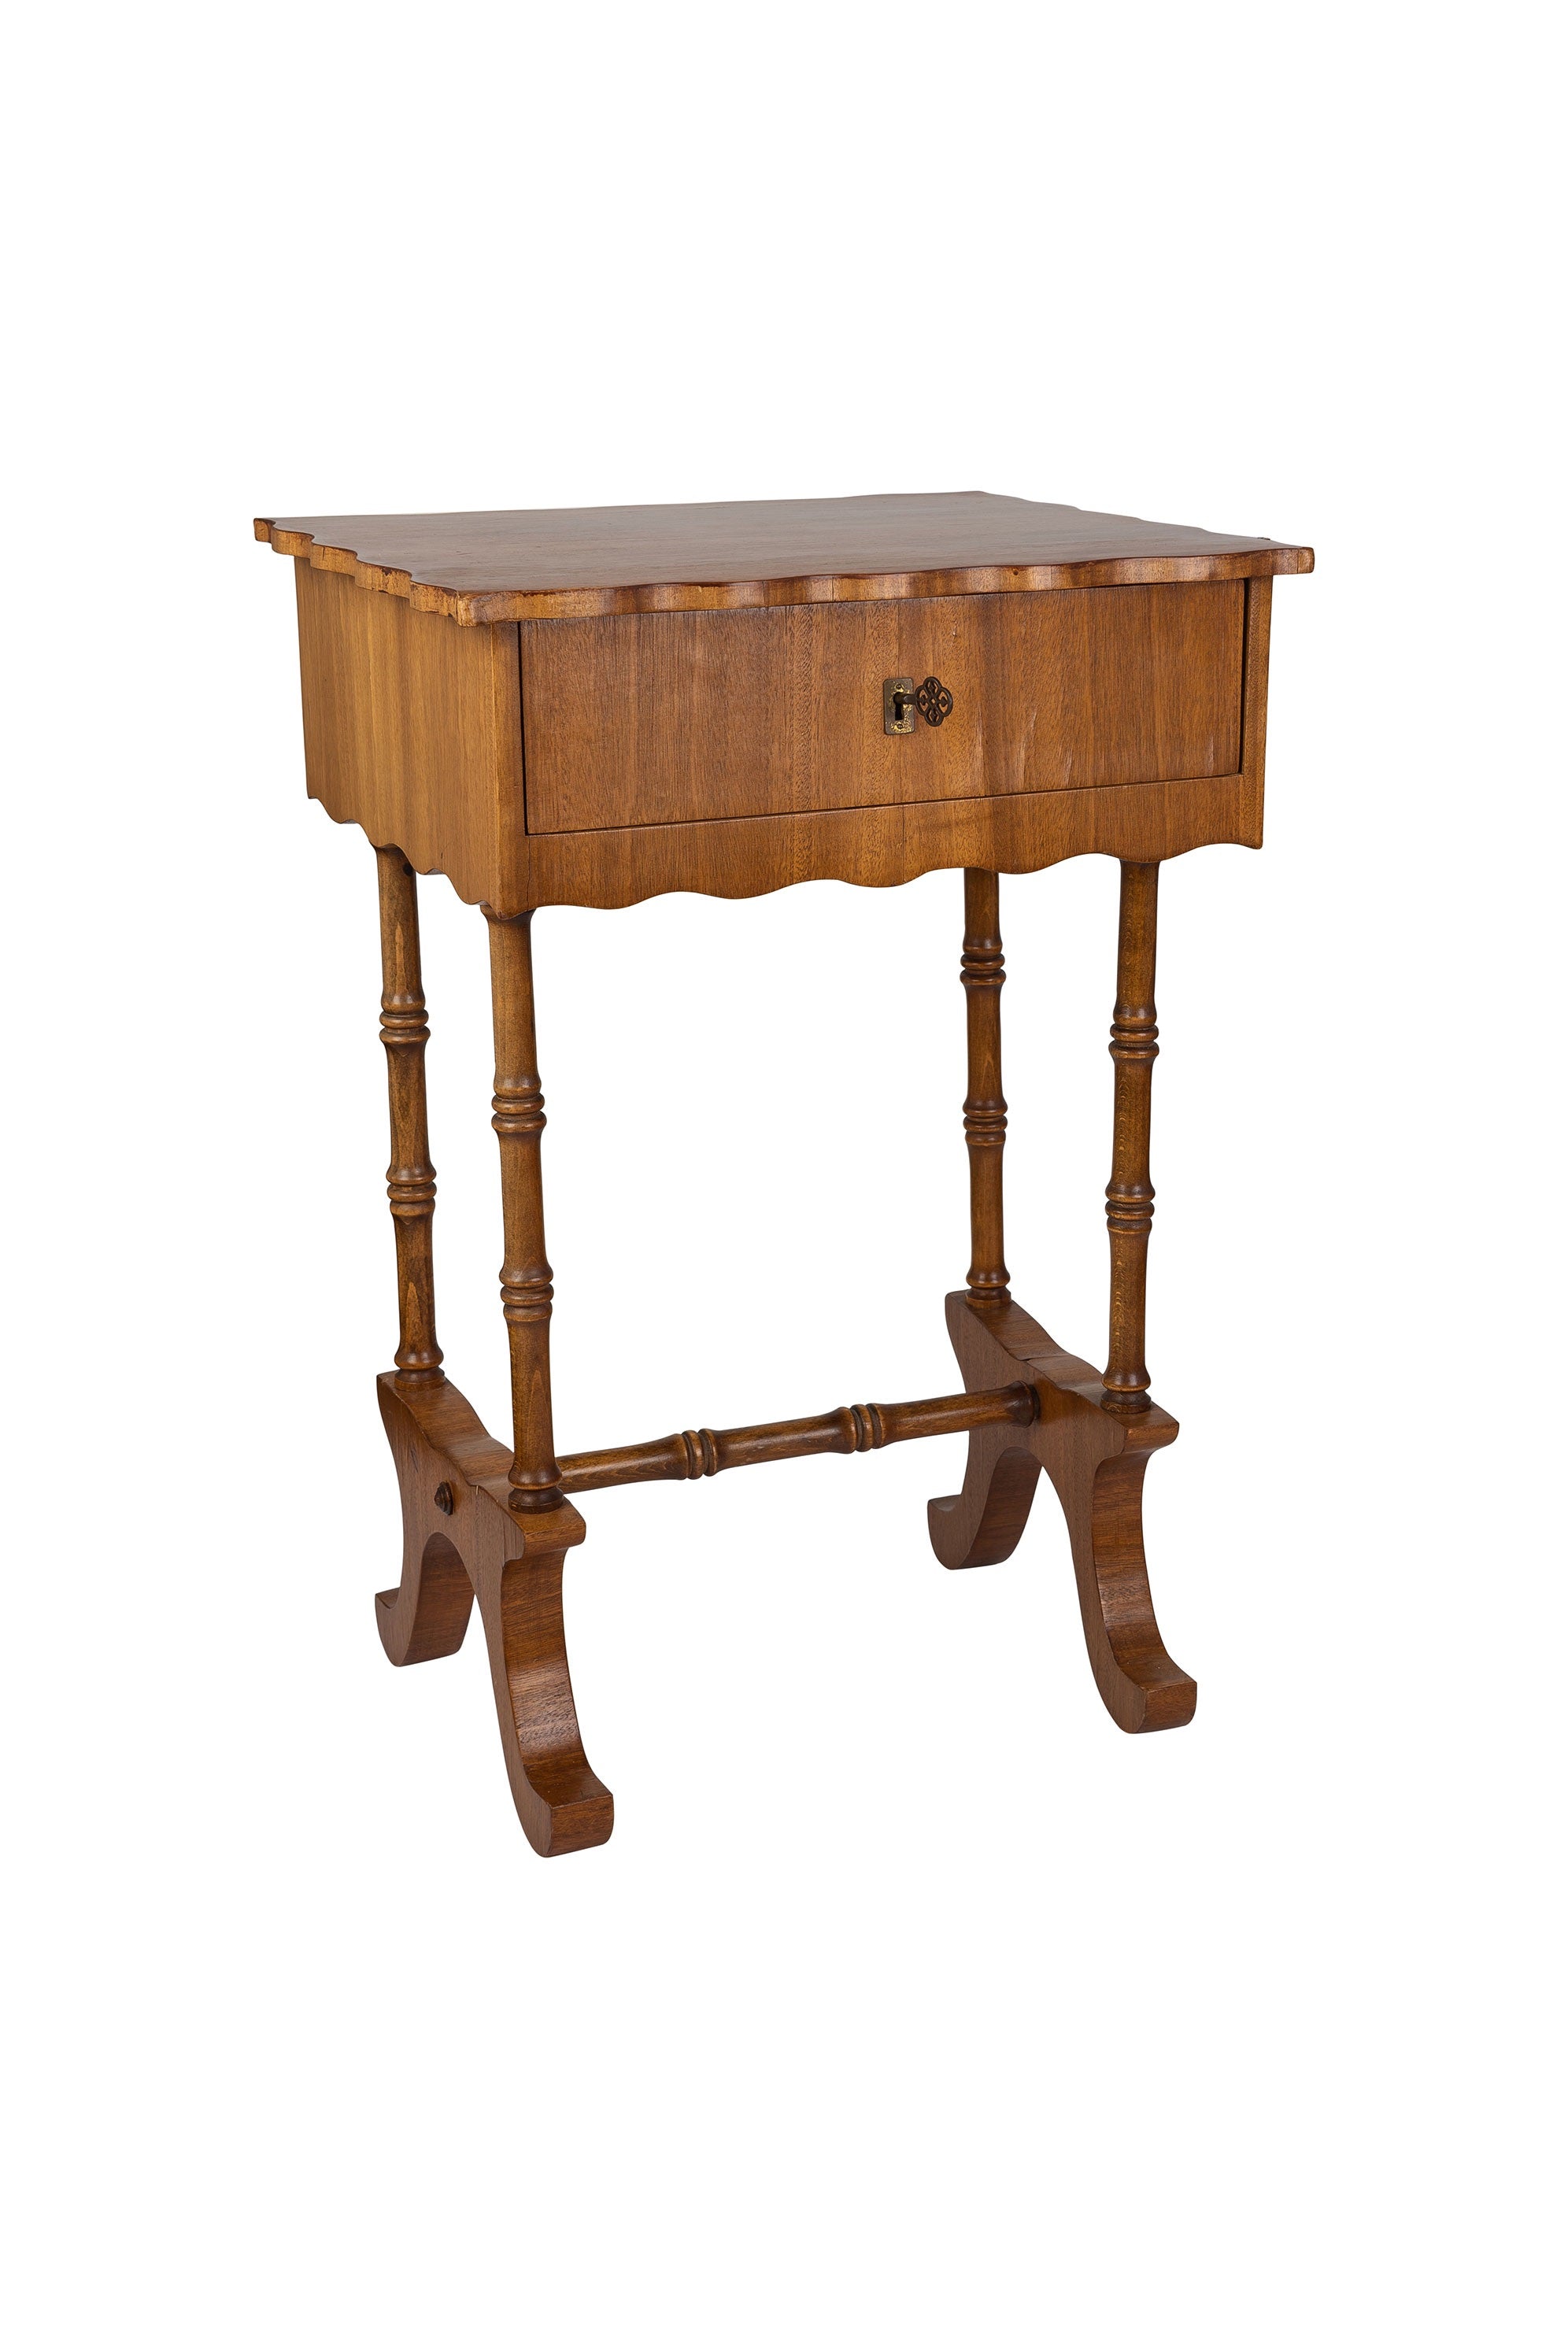 Vintage Faux Bamboo Scalloped Sewing Box / Side Table